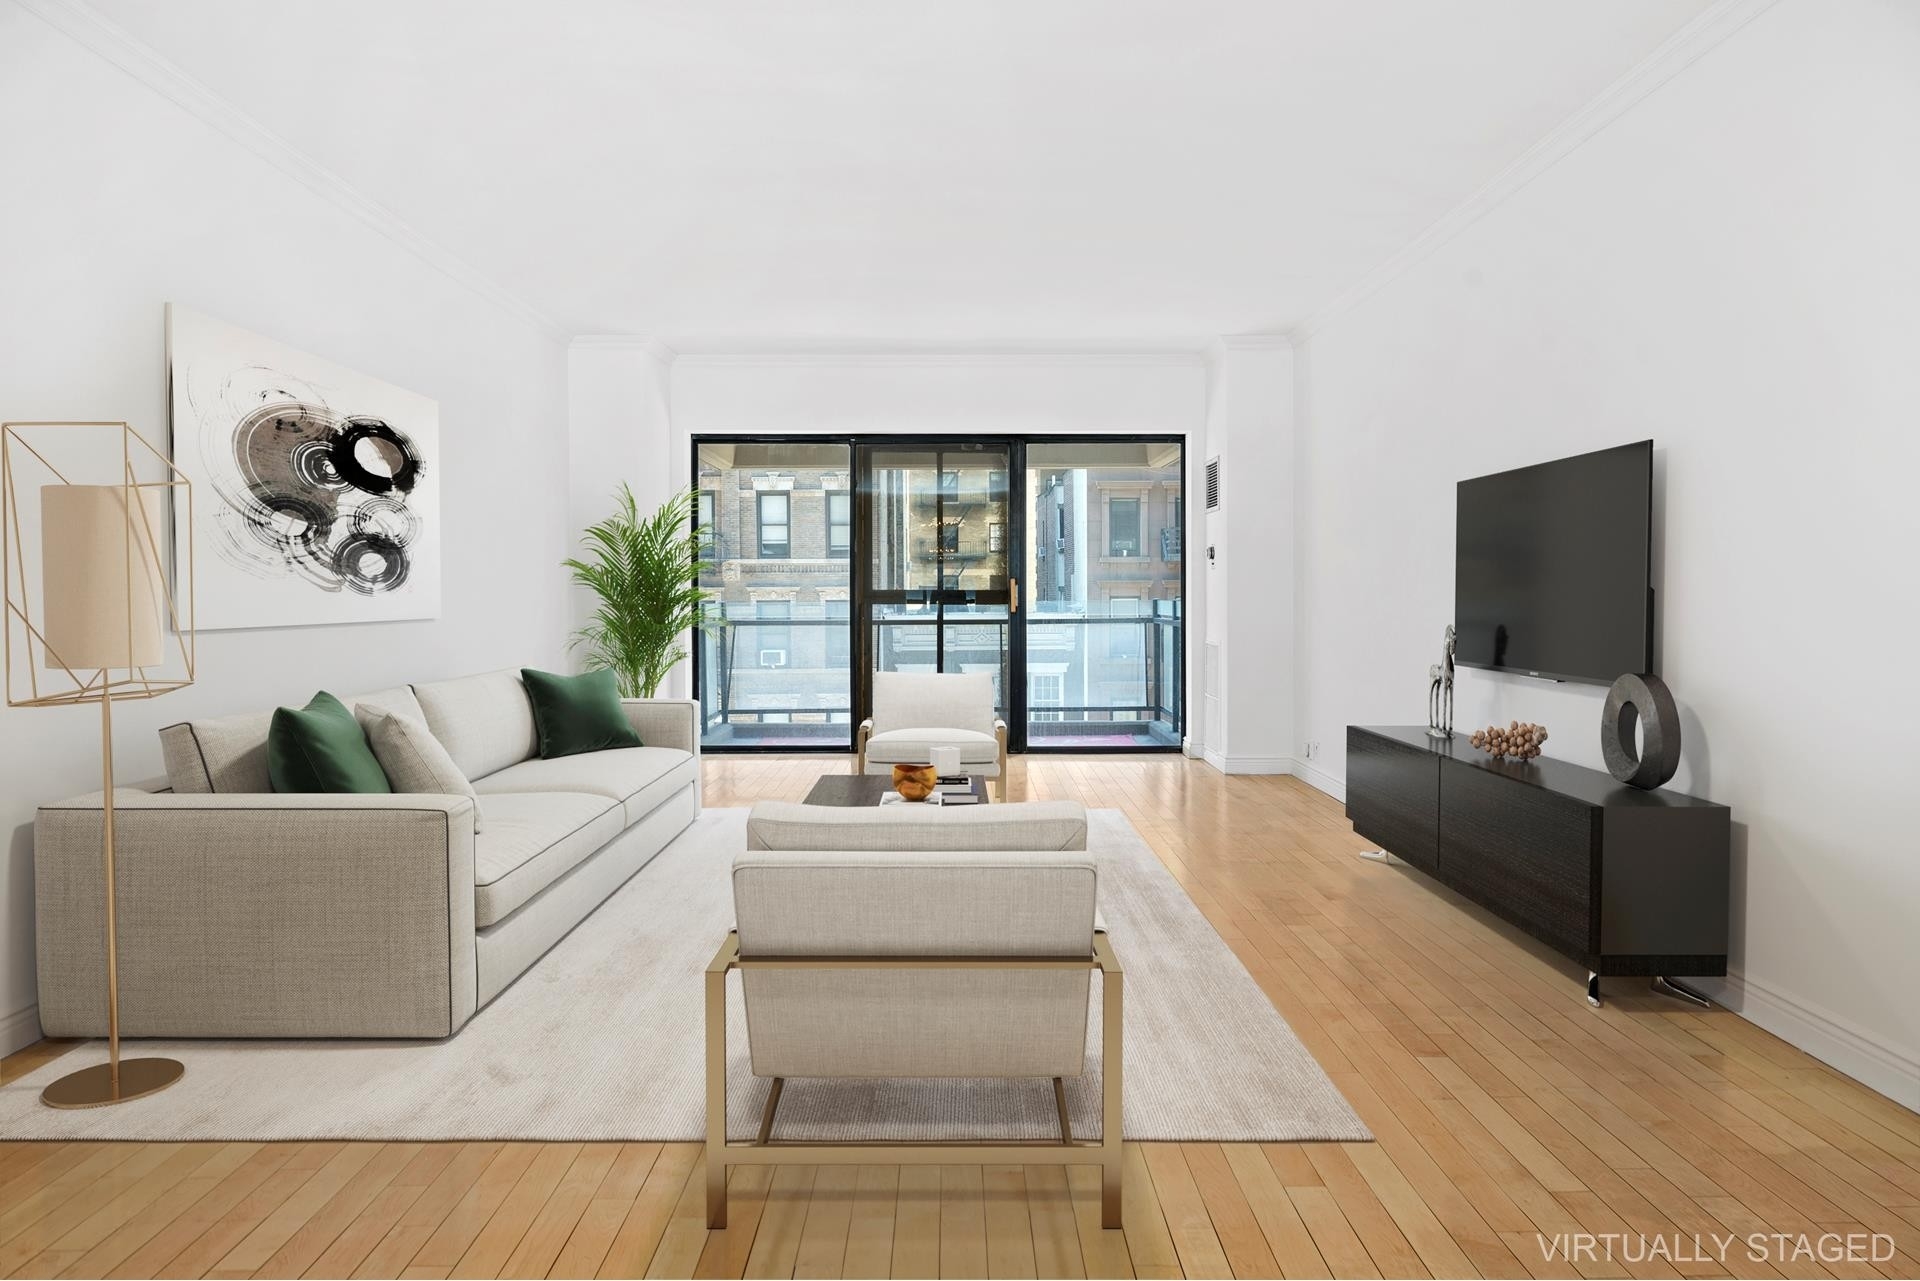 Co-op Properties for Sale at The Sovereign, 425 E 58TH ST , 4H Sutton Place, New York, NY 10022